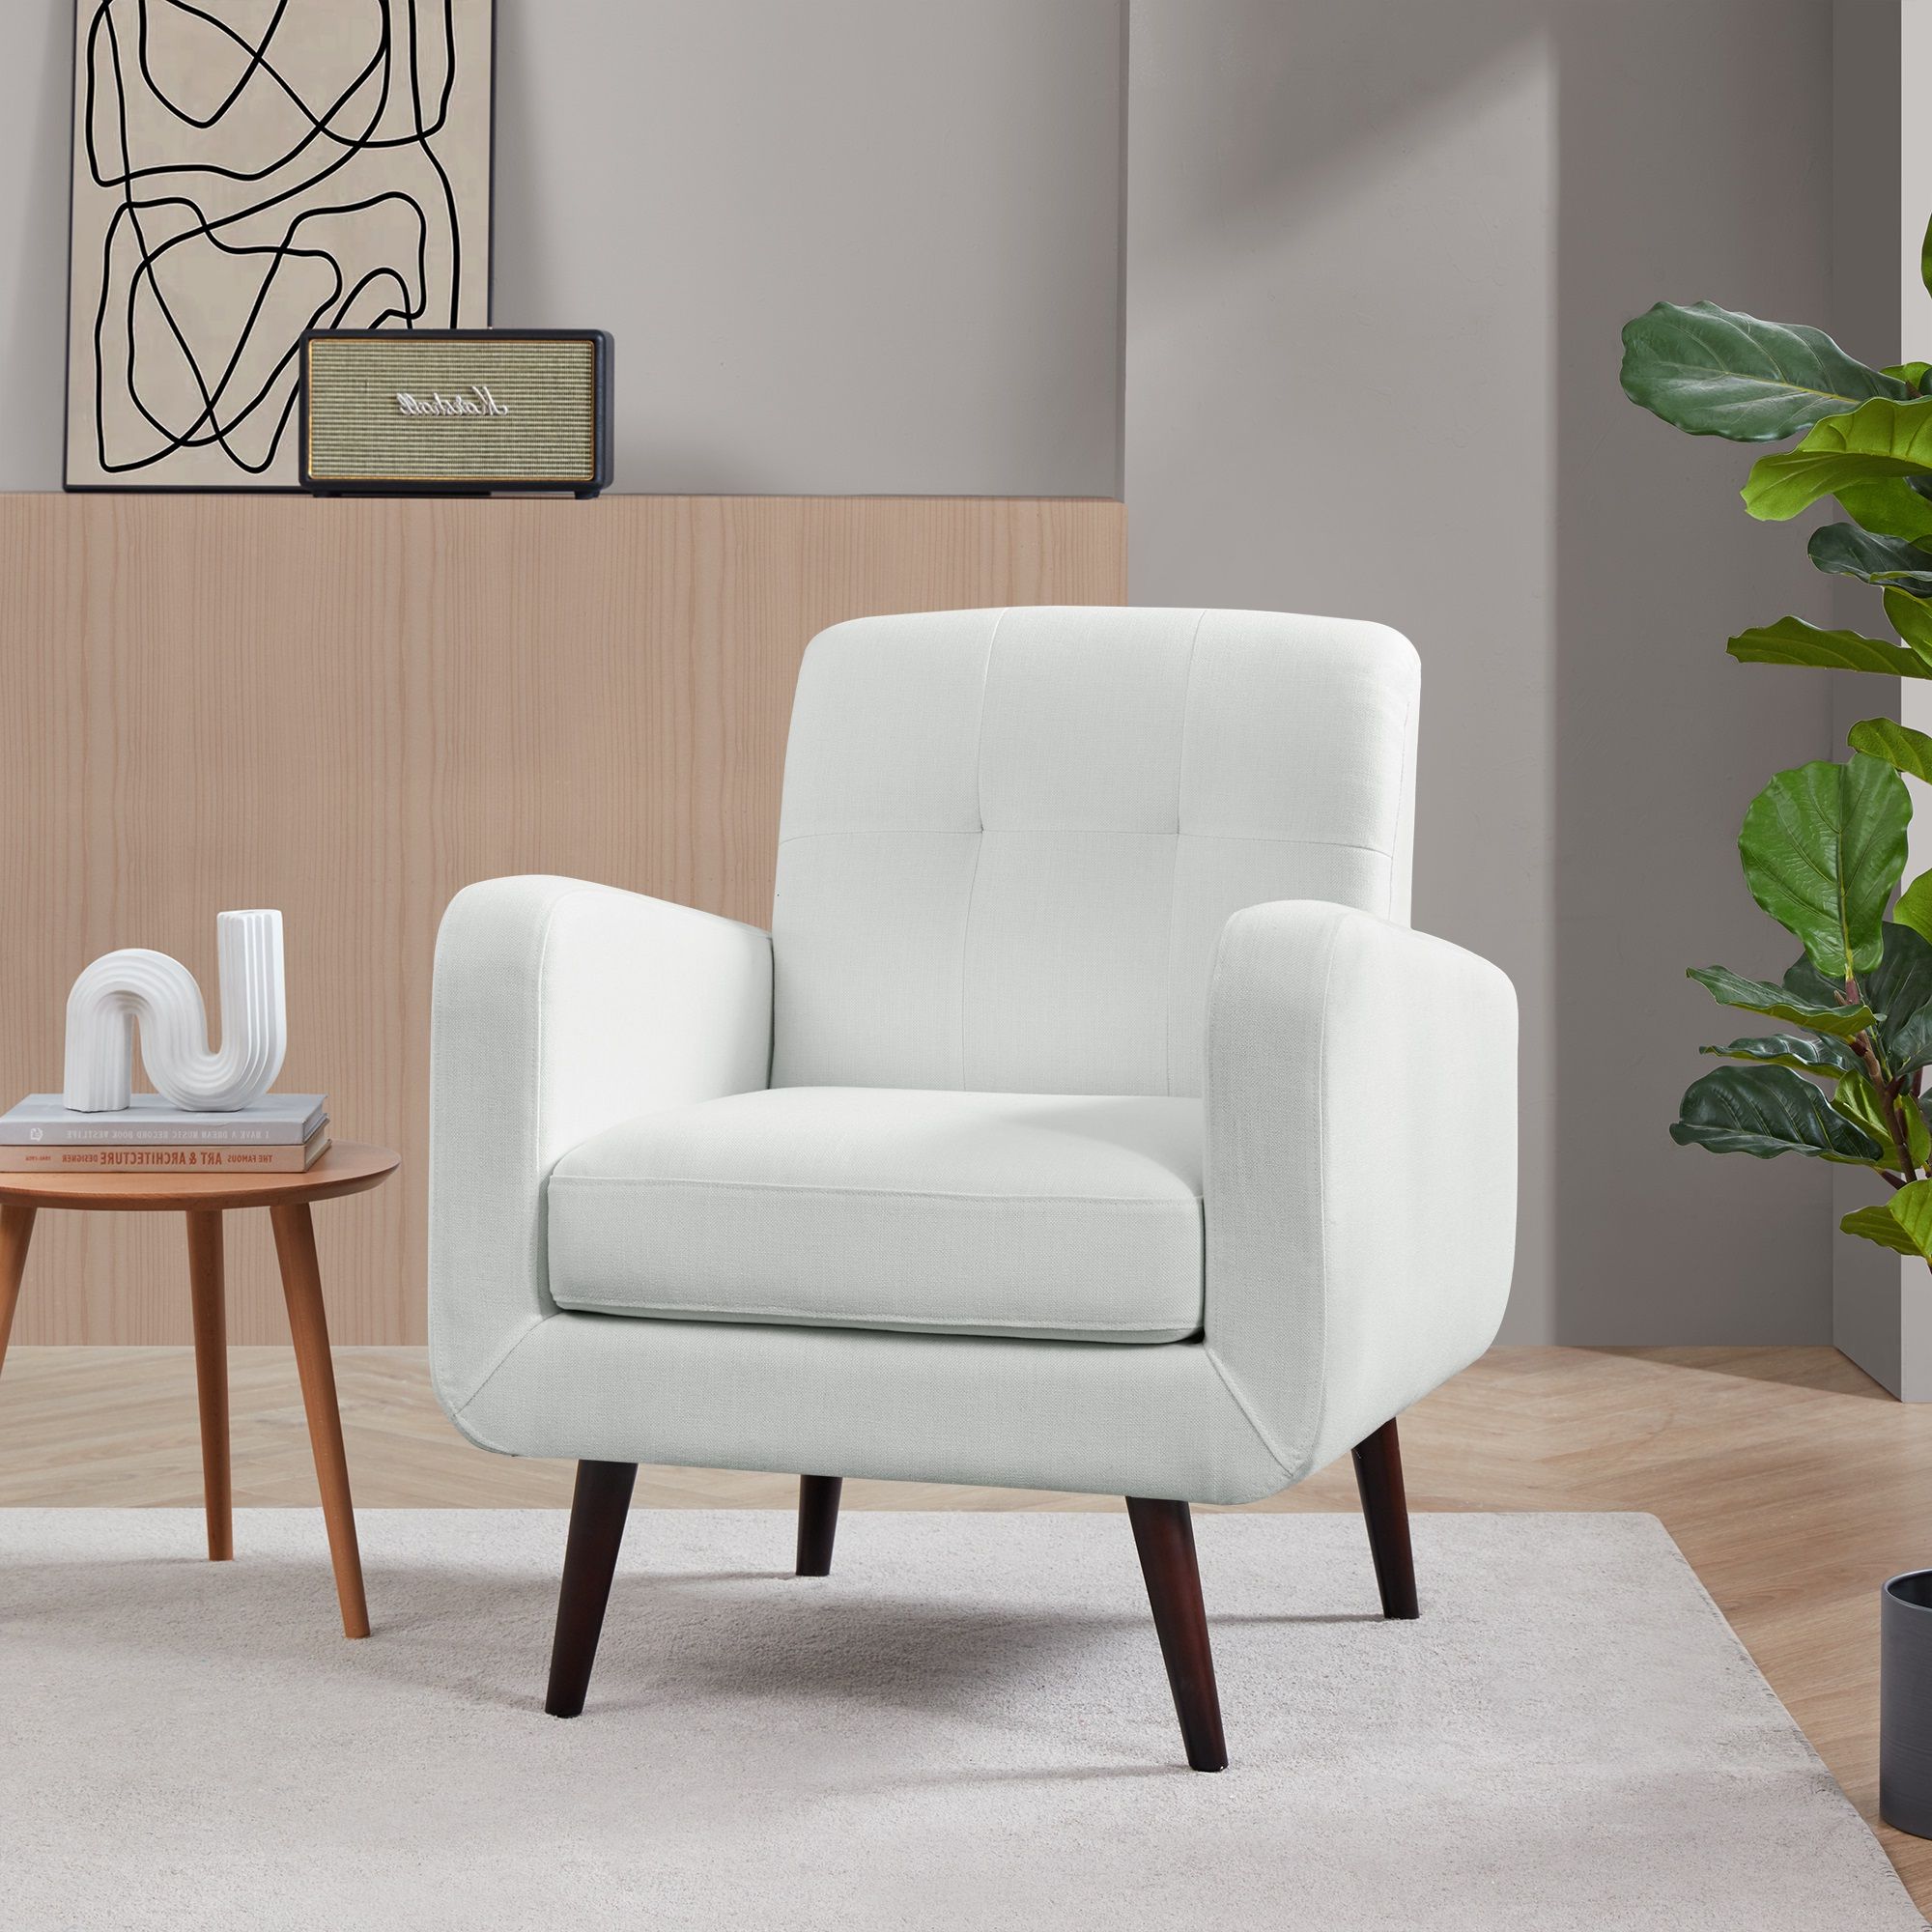 Belleze Hasting Arm Chair Comfy Fabric Upholstered Tufted Accent Chair Regarding Most Current White Textured Round Accent Stools (View 4 of 10)